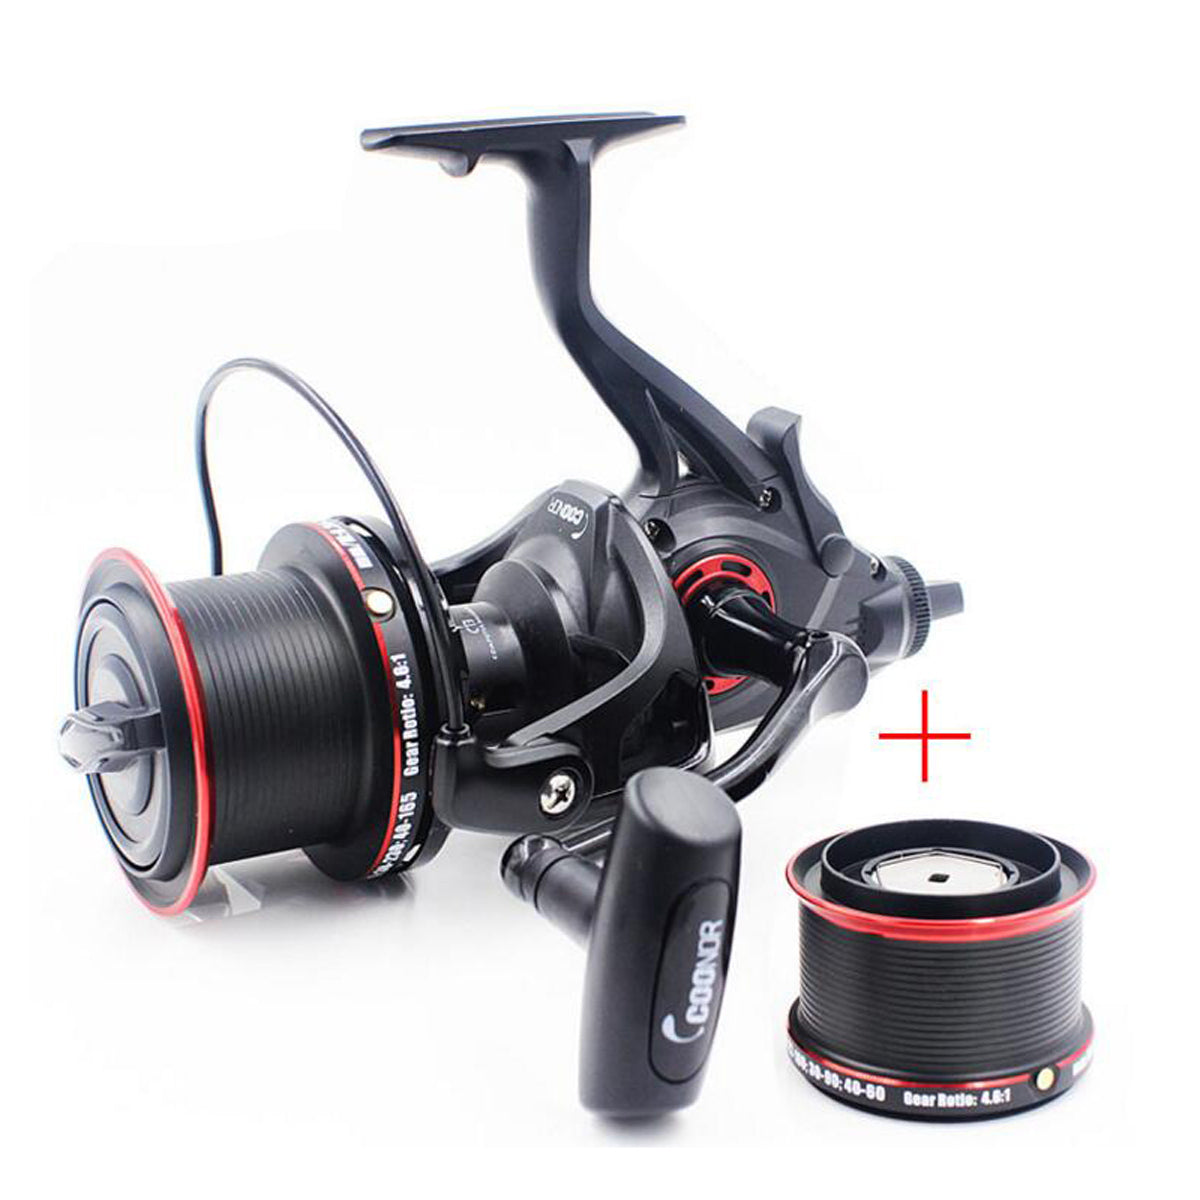 Bobing Coonor NFR9000 12+1BB 4.6:1 Double Unloading Spinning Fishing Reel All Metal Saltwater Wheel